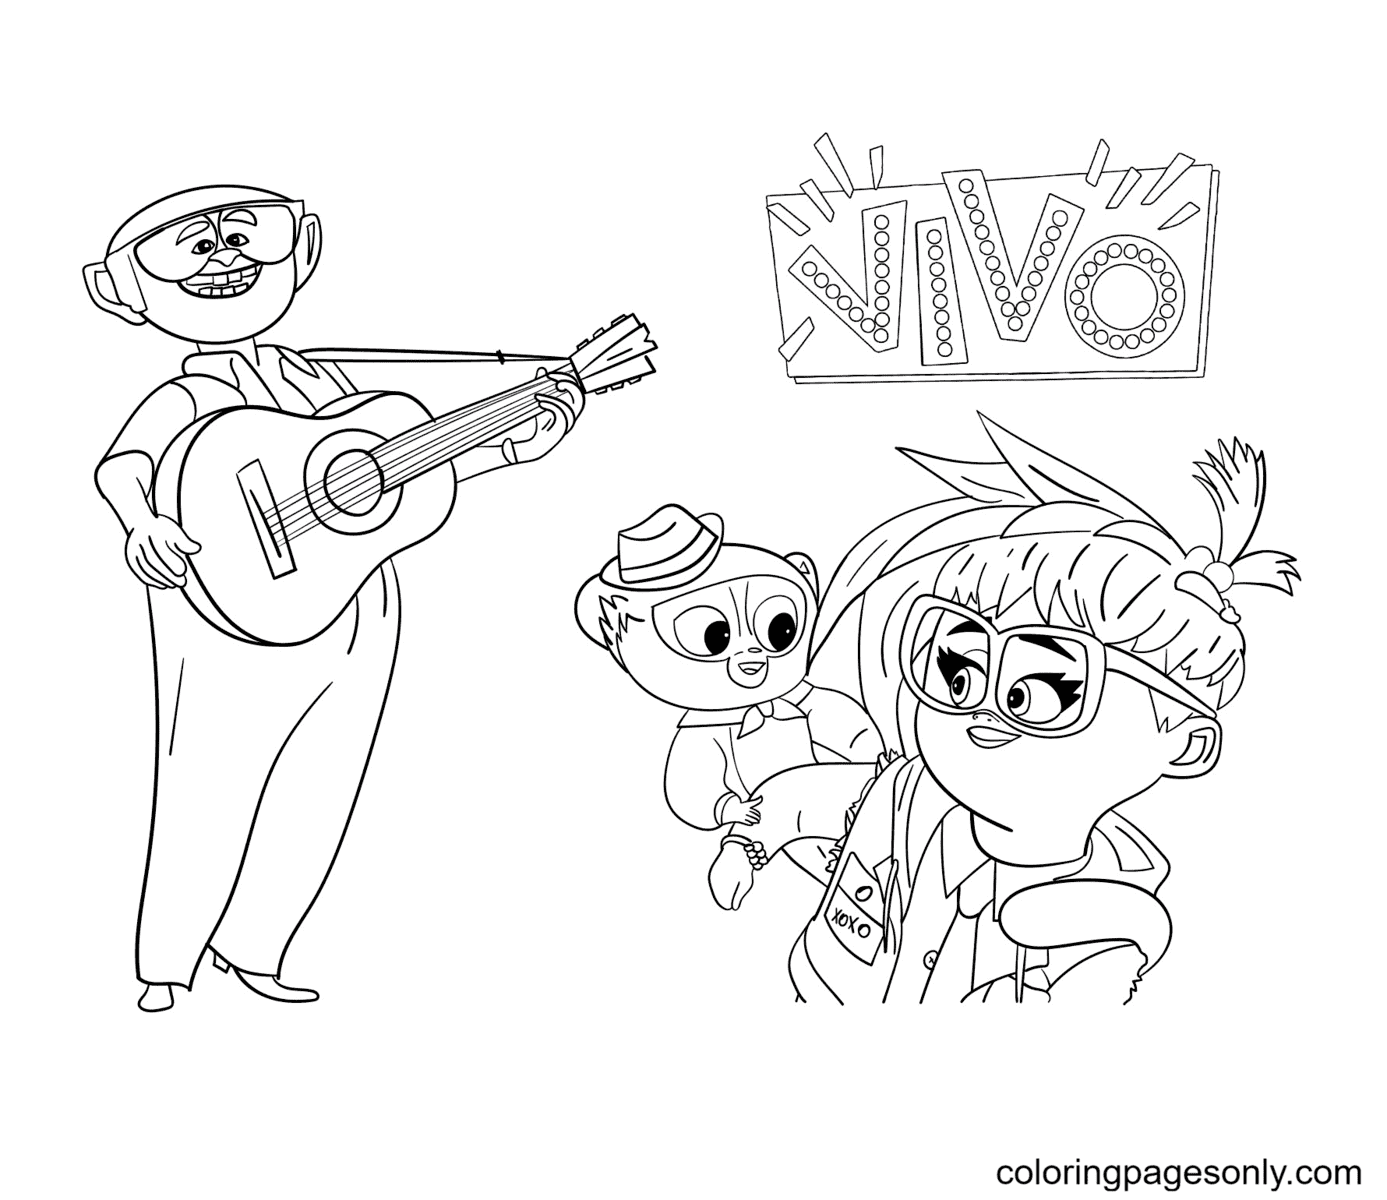 Vivo, Gabriela and Andres Coloring Pages